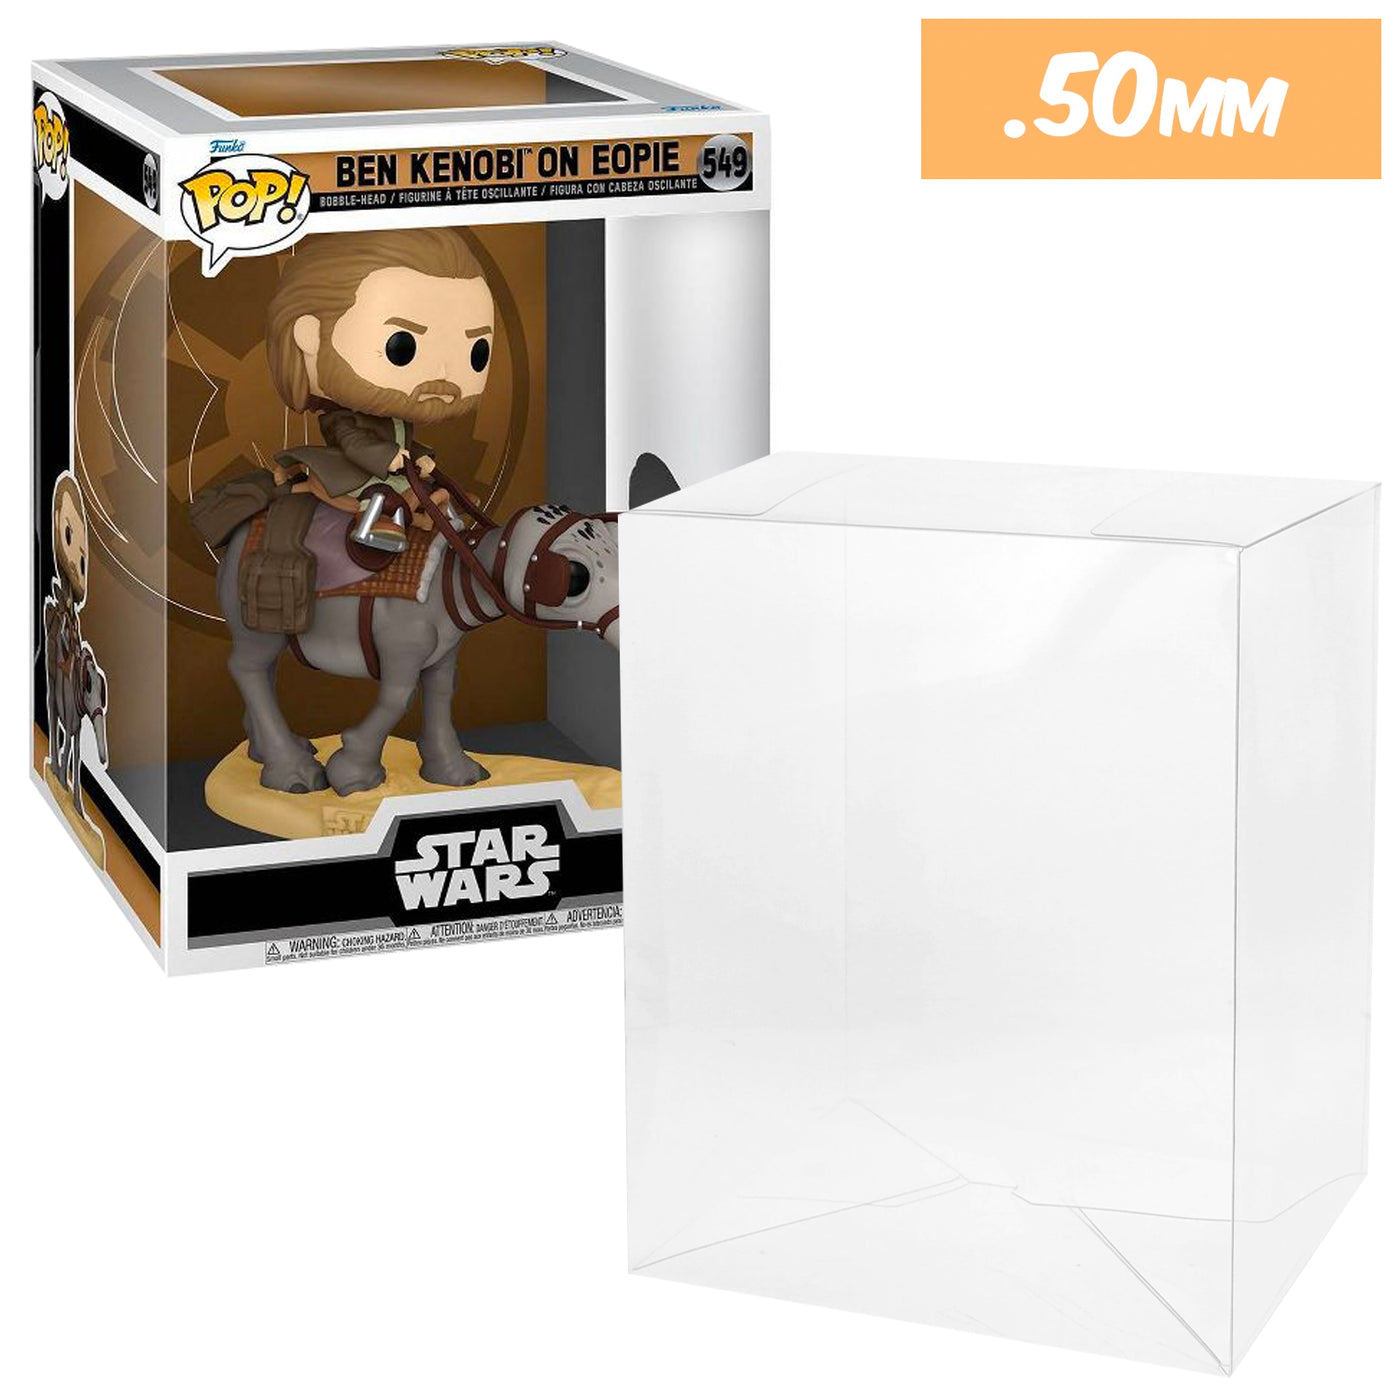 star wars ben kenobi on eopie best funko pop protectors thick strong uv scratch flat top stack vinyl display geek plastic shield vaulted eco armor fits collect protect display case kollector protector